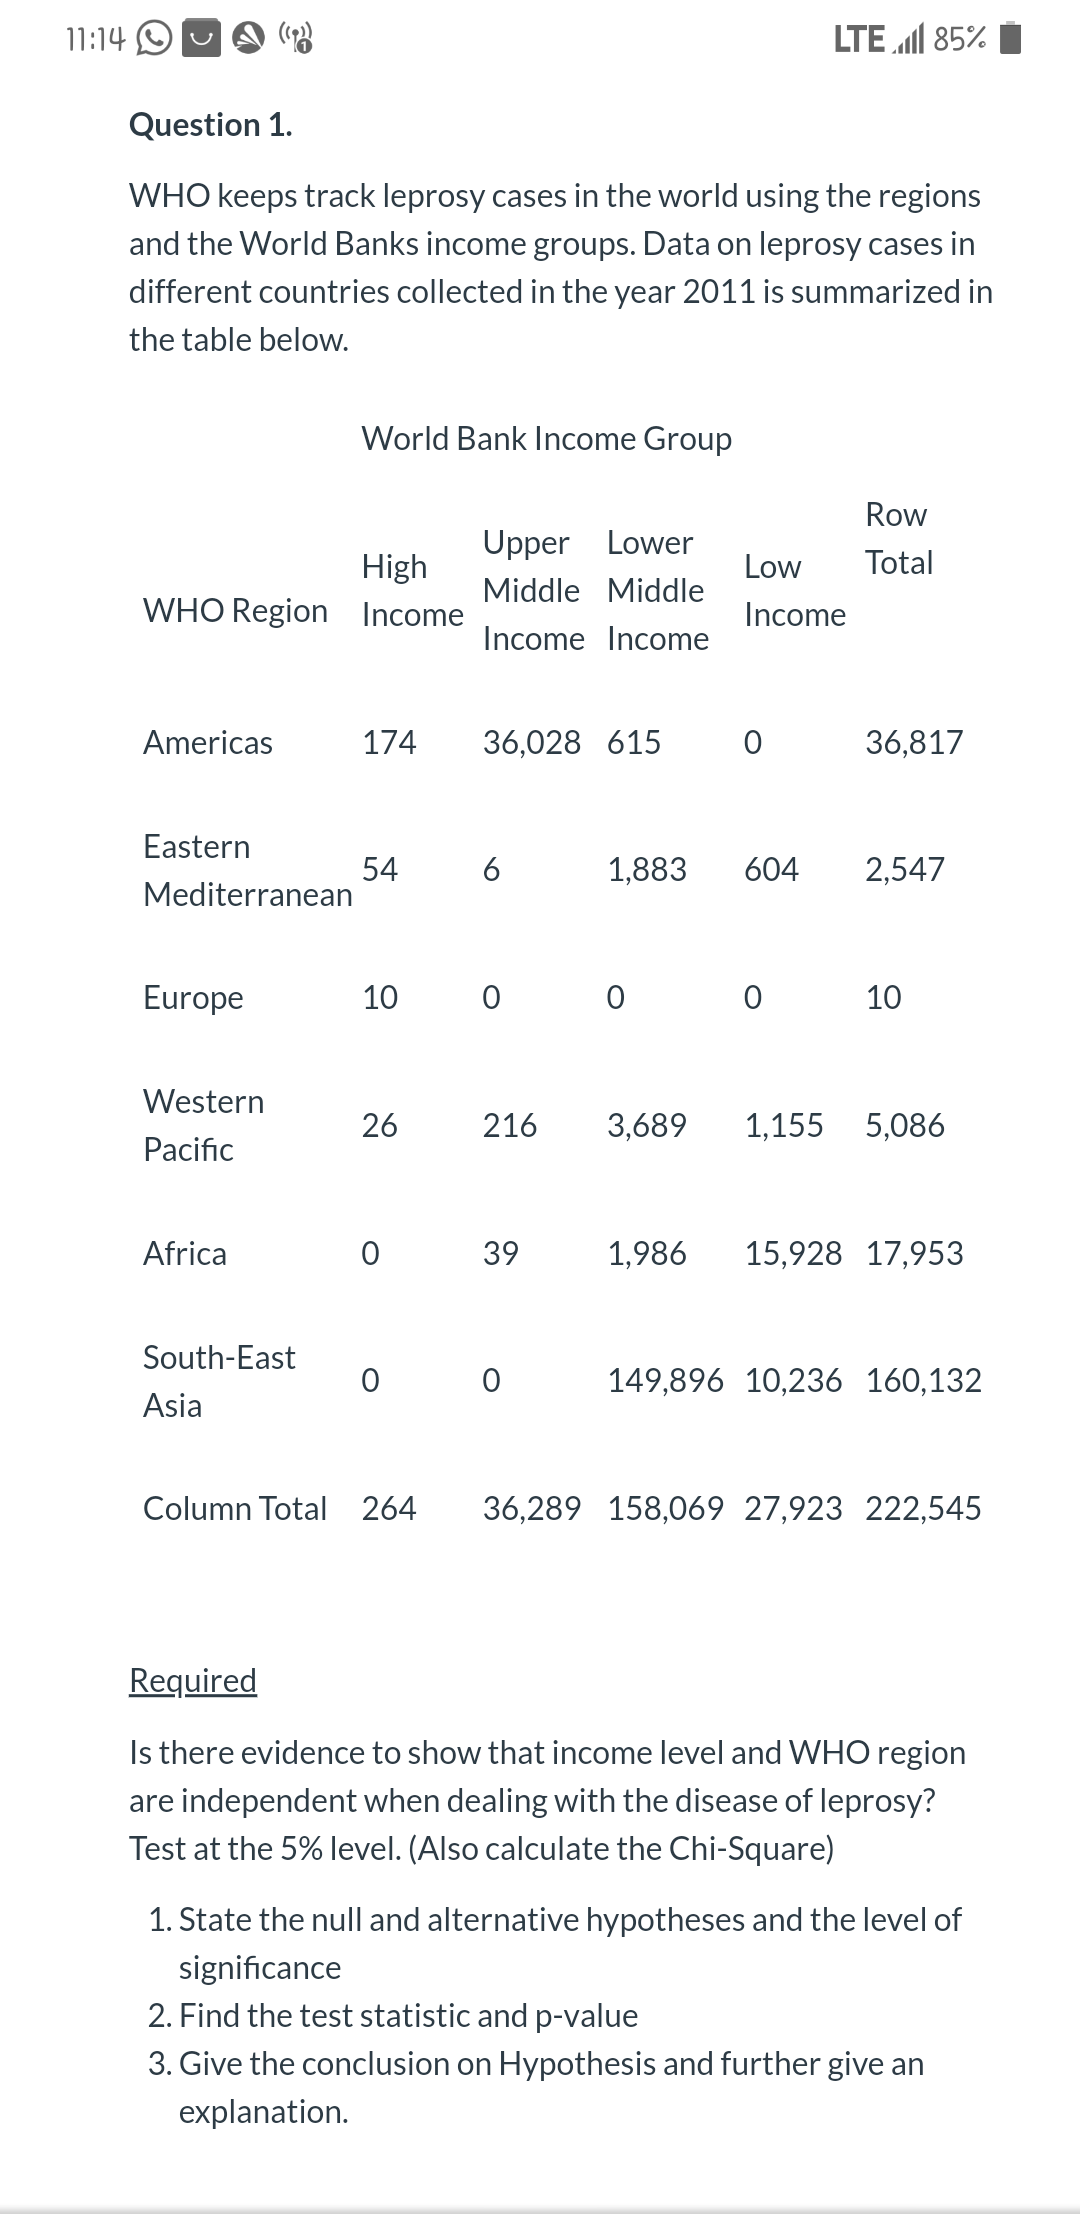 11:14
Question 1.
WHO keeps track leprosy cases in the world using the regions
and the World Banks income groups. Data on leprosy cases in
different countries collected in the year 2011 is summarized in
the table below.
High
WHO Region Income
Americas
Eastern
Mediterranean
Europe
Western
Pacific
Africa
World Bank Income Group
South-East
Asia
174
54
10
26
0
0
Upper Lower
Middle Middle
Income Income
36,028 615
6
0 0
1,883
39
0
LTE 85%
Row
Low Total
Income
0
0
36,817
604 2,547
216 3,689 1,155 5,086
10
1,986 15,928 17,953
149,896 10,236 160,132
Column Total 264 36,289 158,069 27,923 222,545
Required
Is there evidence to show that income level and WHO region
are independent when dealing with the disease of leprosy?
Test at the 5% level. (Also calculate the Chi-Square)
1. State the null and alternative hypotheses and the level of
significance
2. Find the test statistic and p-value
3. Give the conclusion on Hypothesis and further give an
explanation.